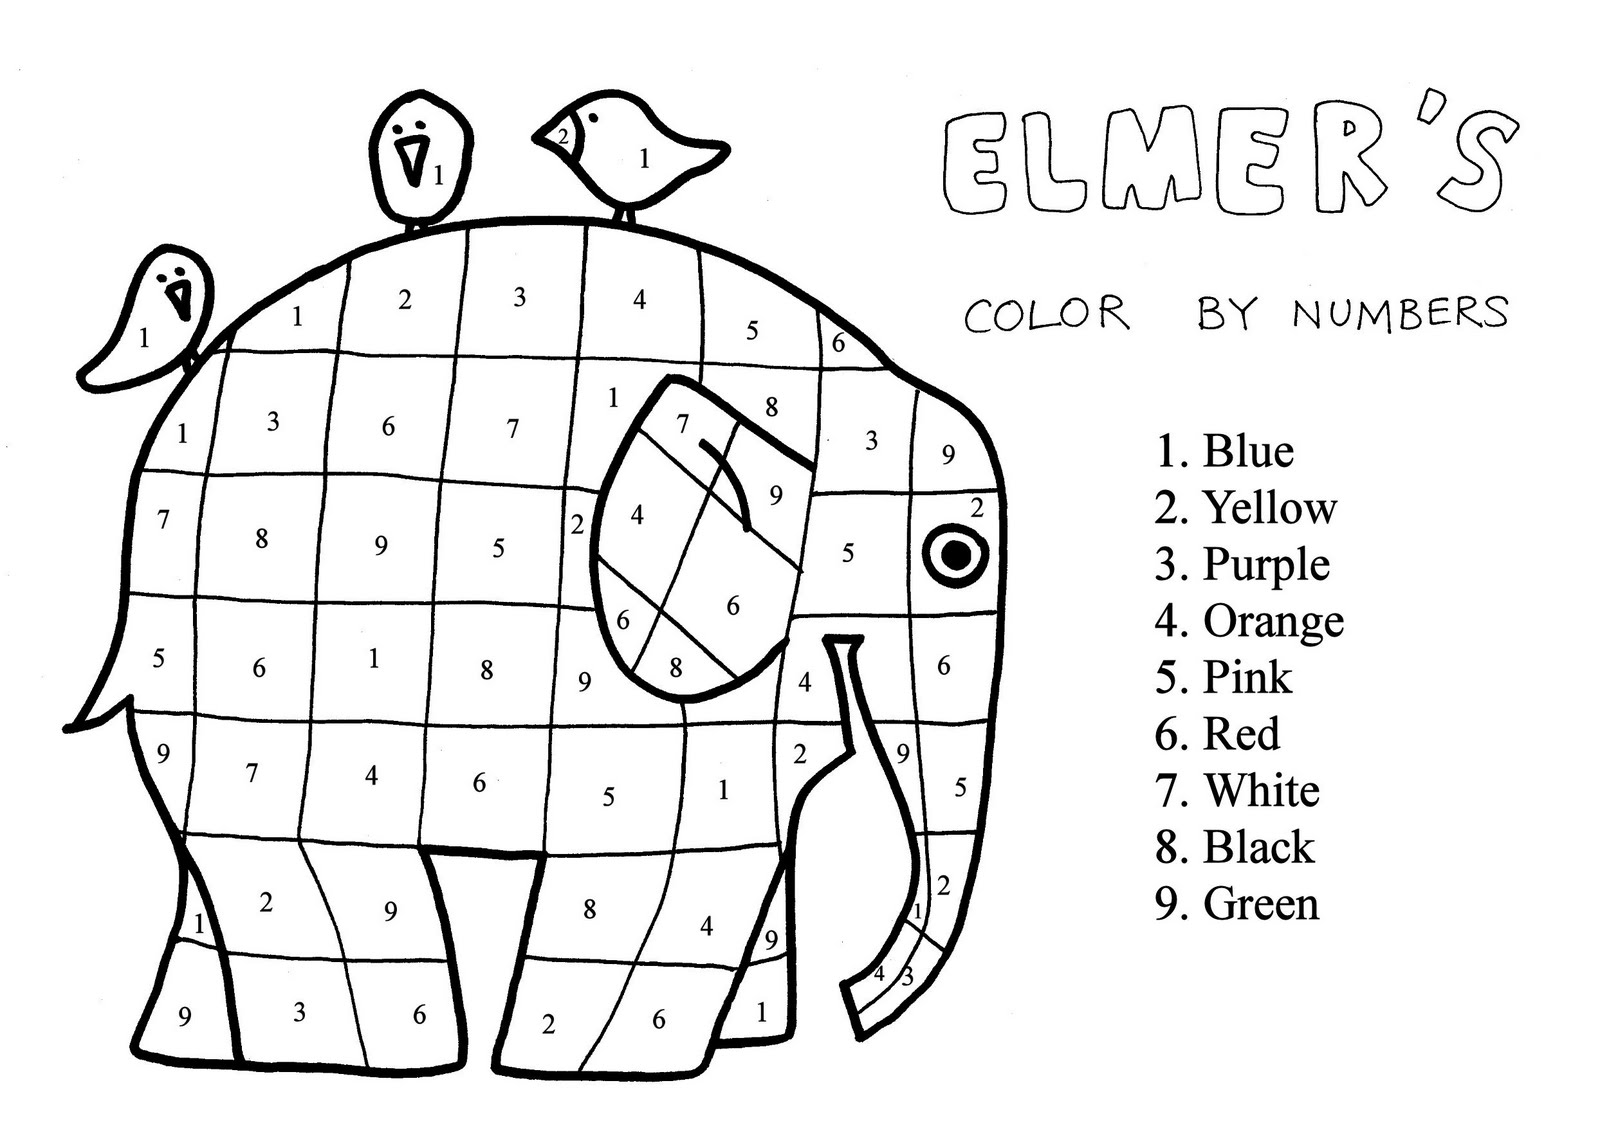 Download Elmer the Patchwork Elephant Coloring Page - Lines Across